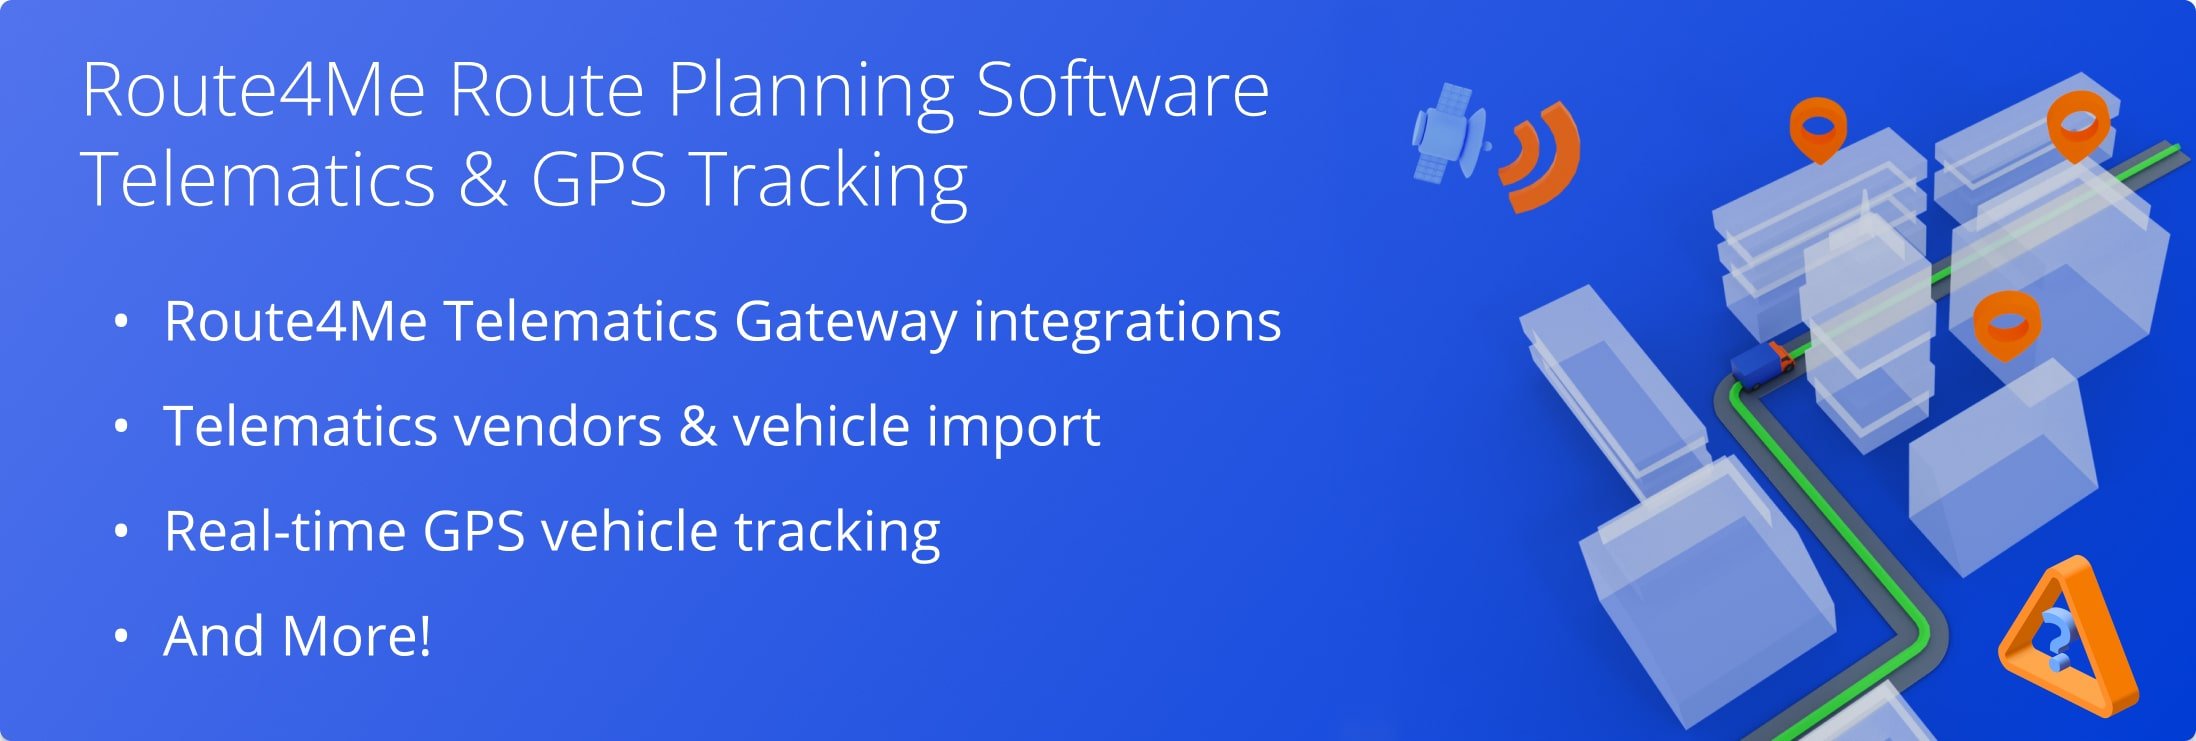 Route4Me Route Planning Software Telematics Gateway integrations, supported vendors, vehicle connections, real-time GPS vehicle tracking, and more. 